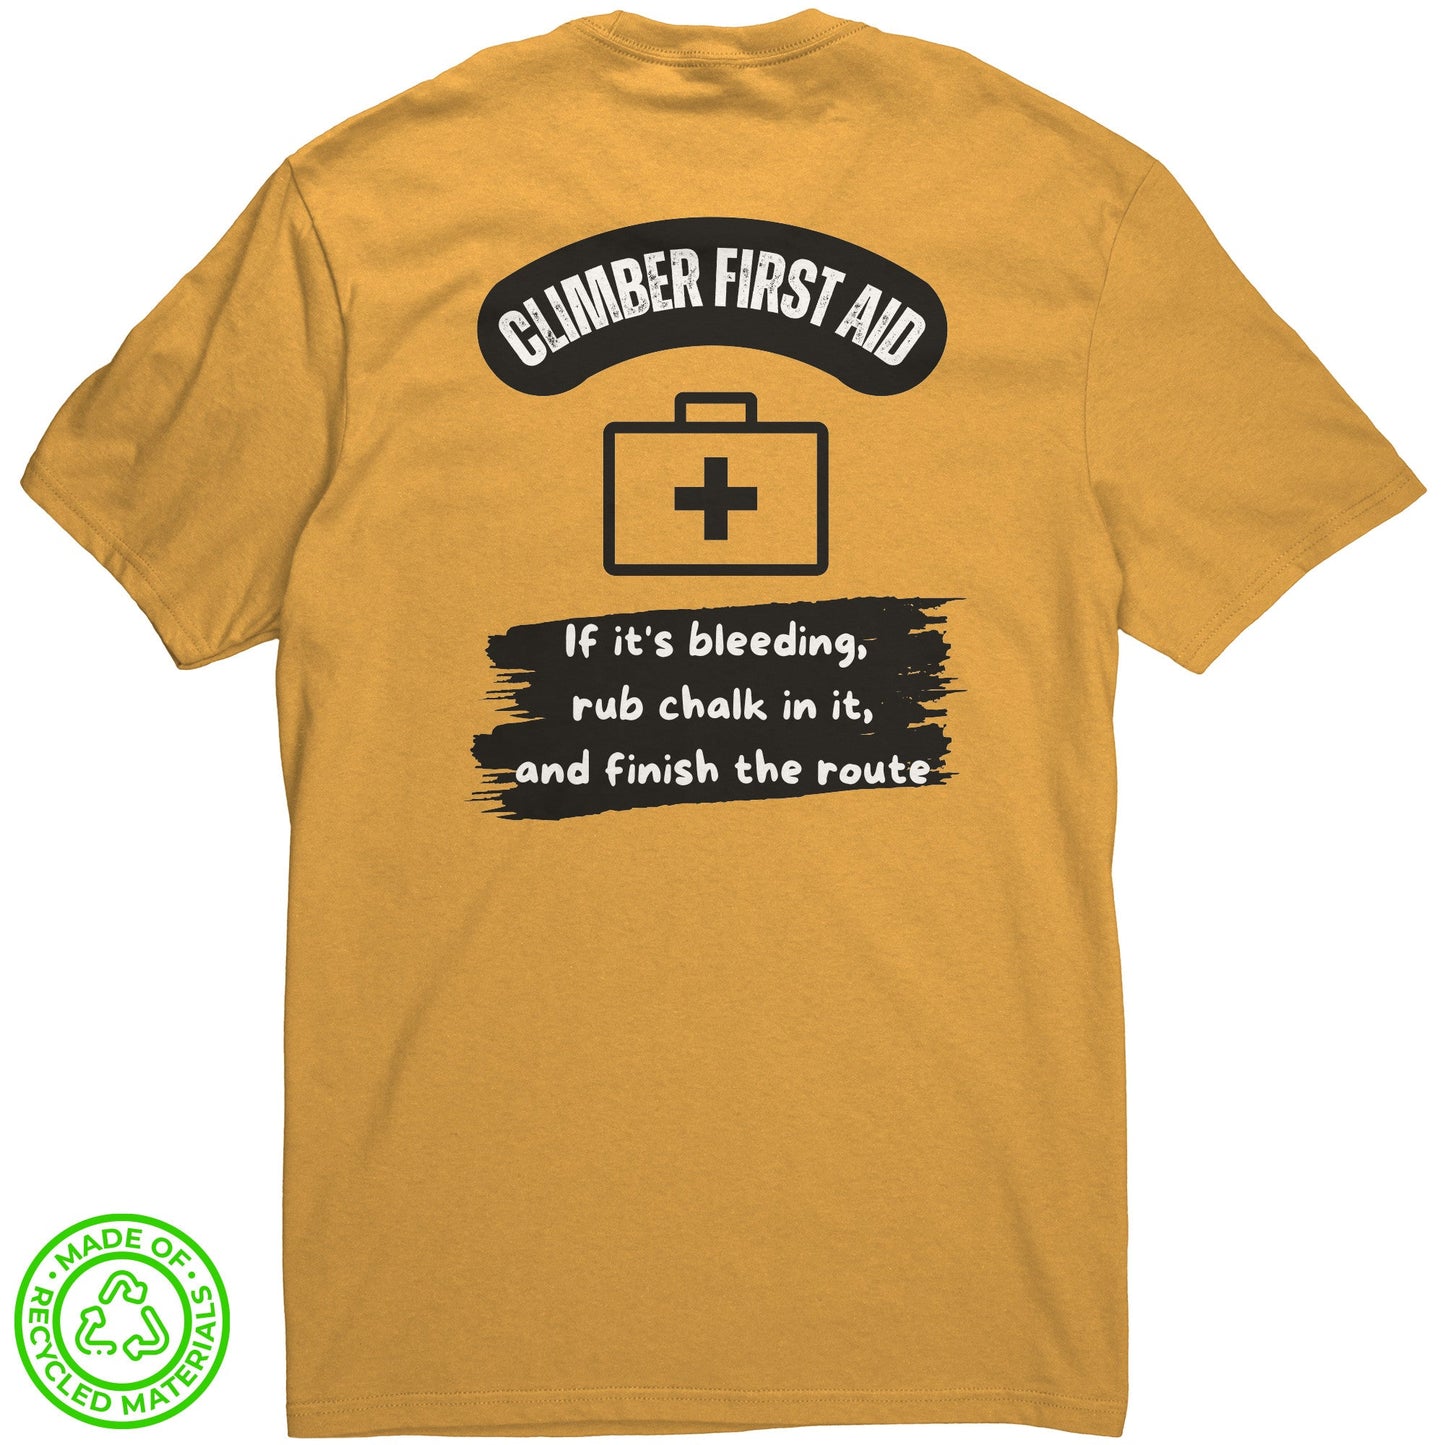 Eco-Friendly Re-Tee (Climber First Aid)